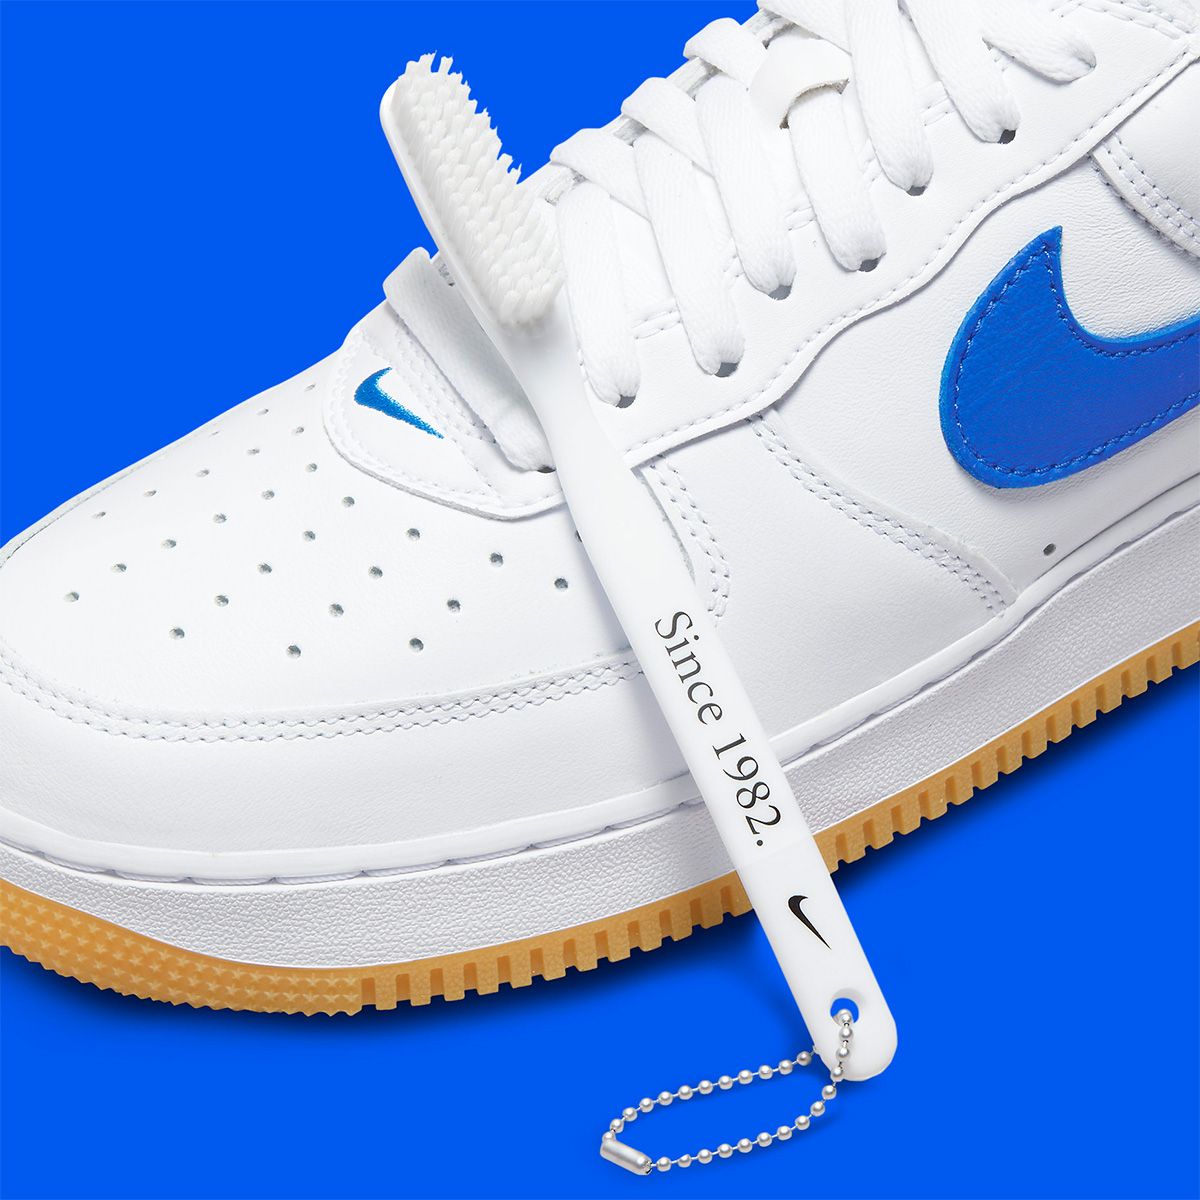 NIKE Air Force 1 - AF1 '82 Low (White/white/white) 